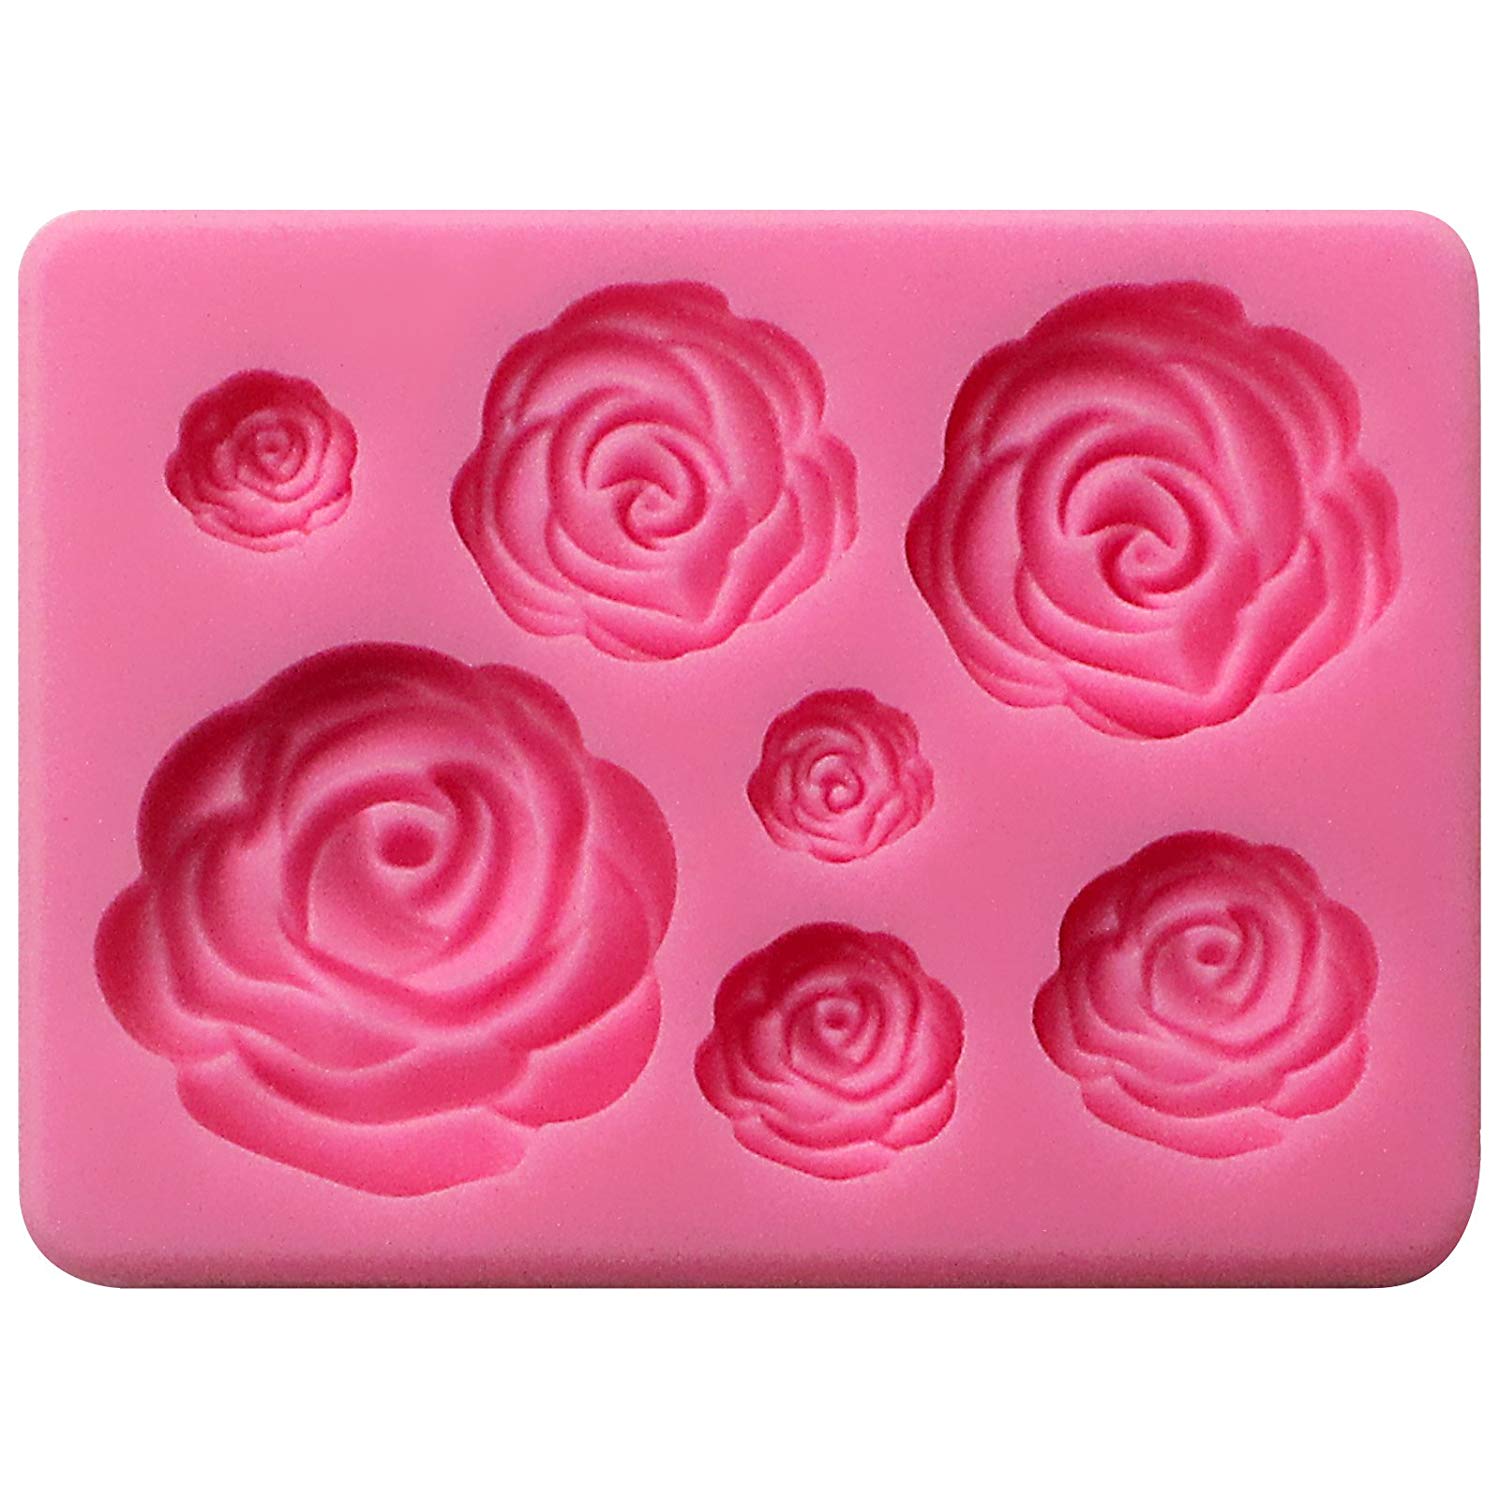 Mini Flowers Silicone Mold for Chocolate Flower Mold for 